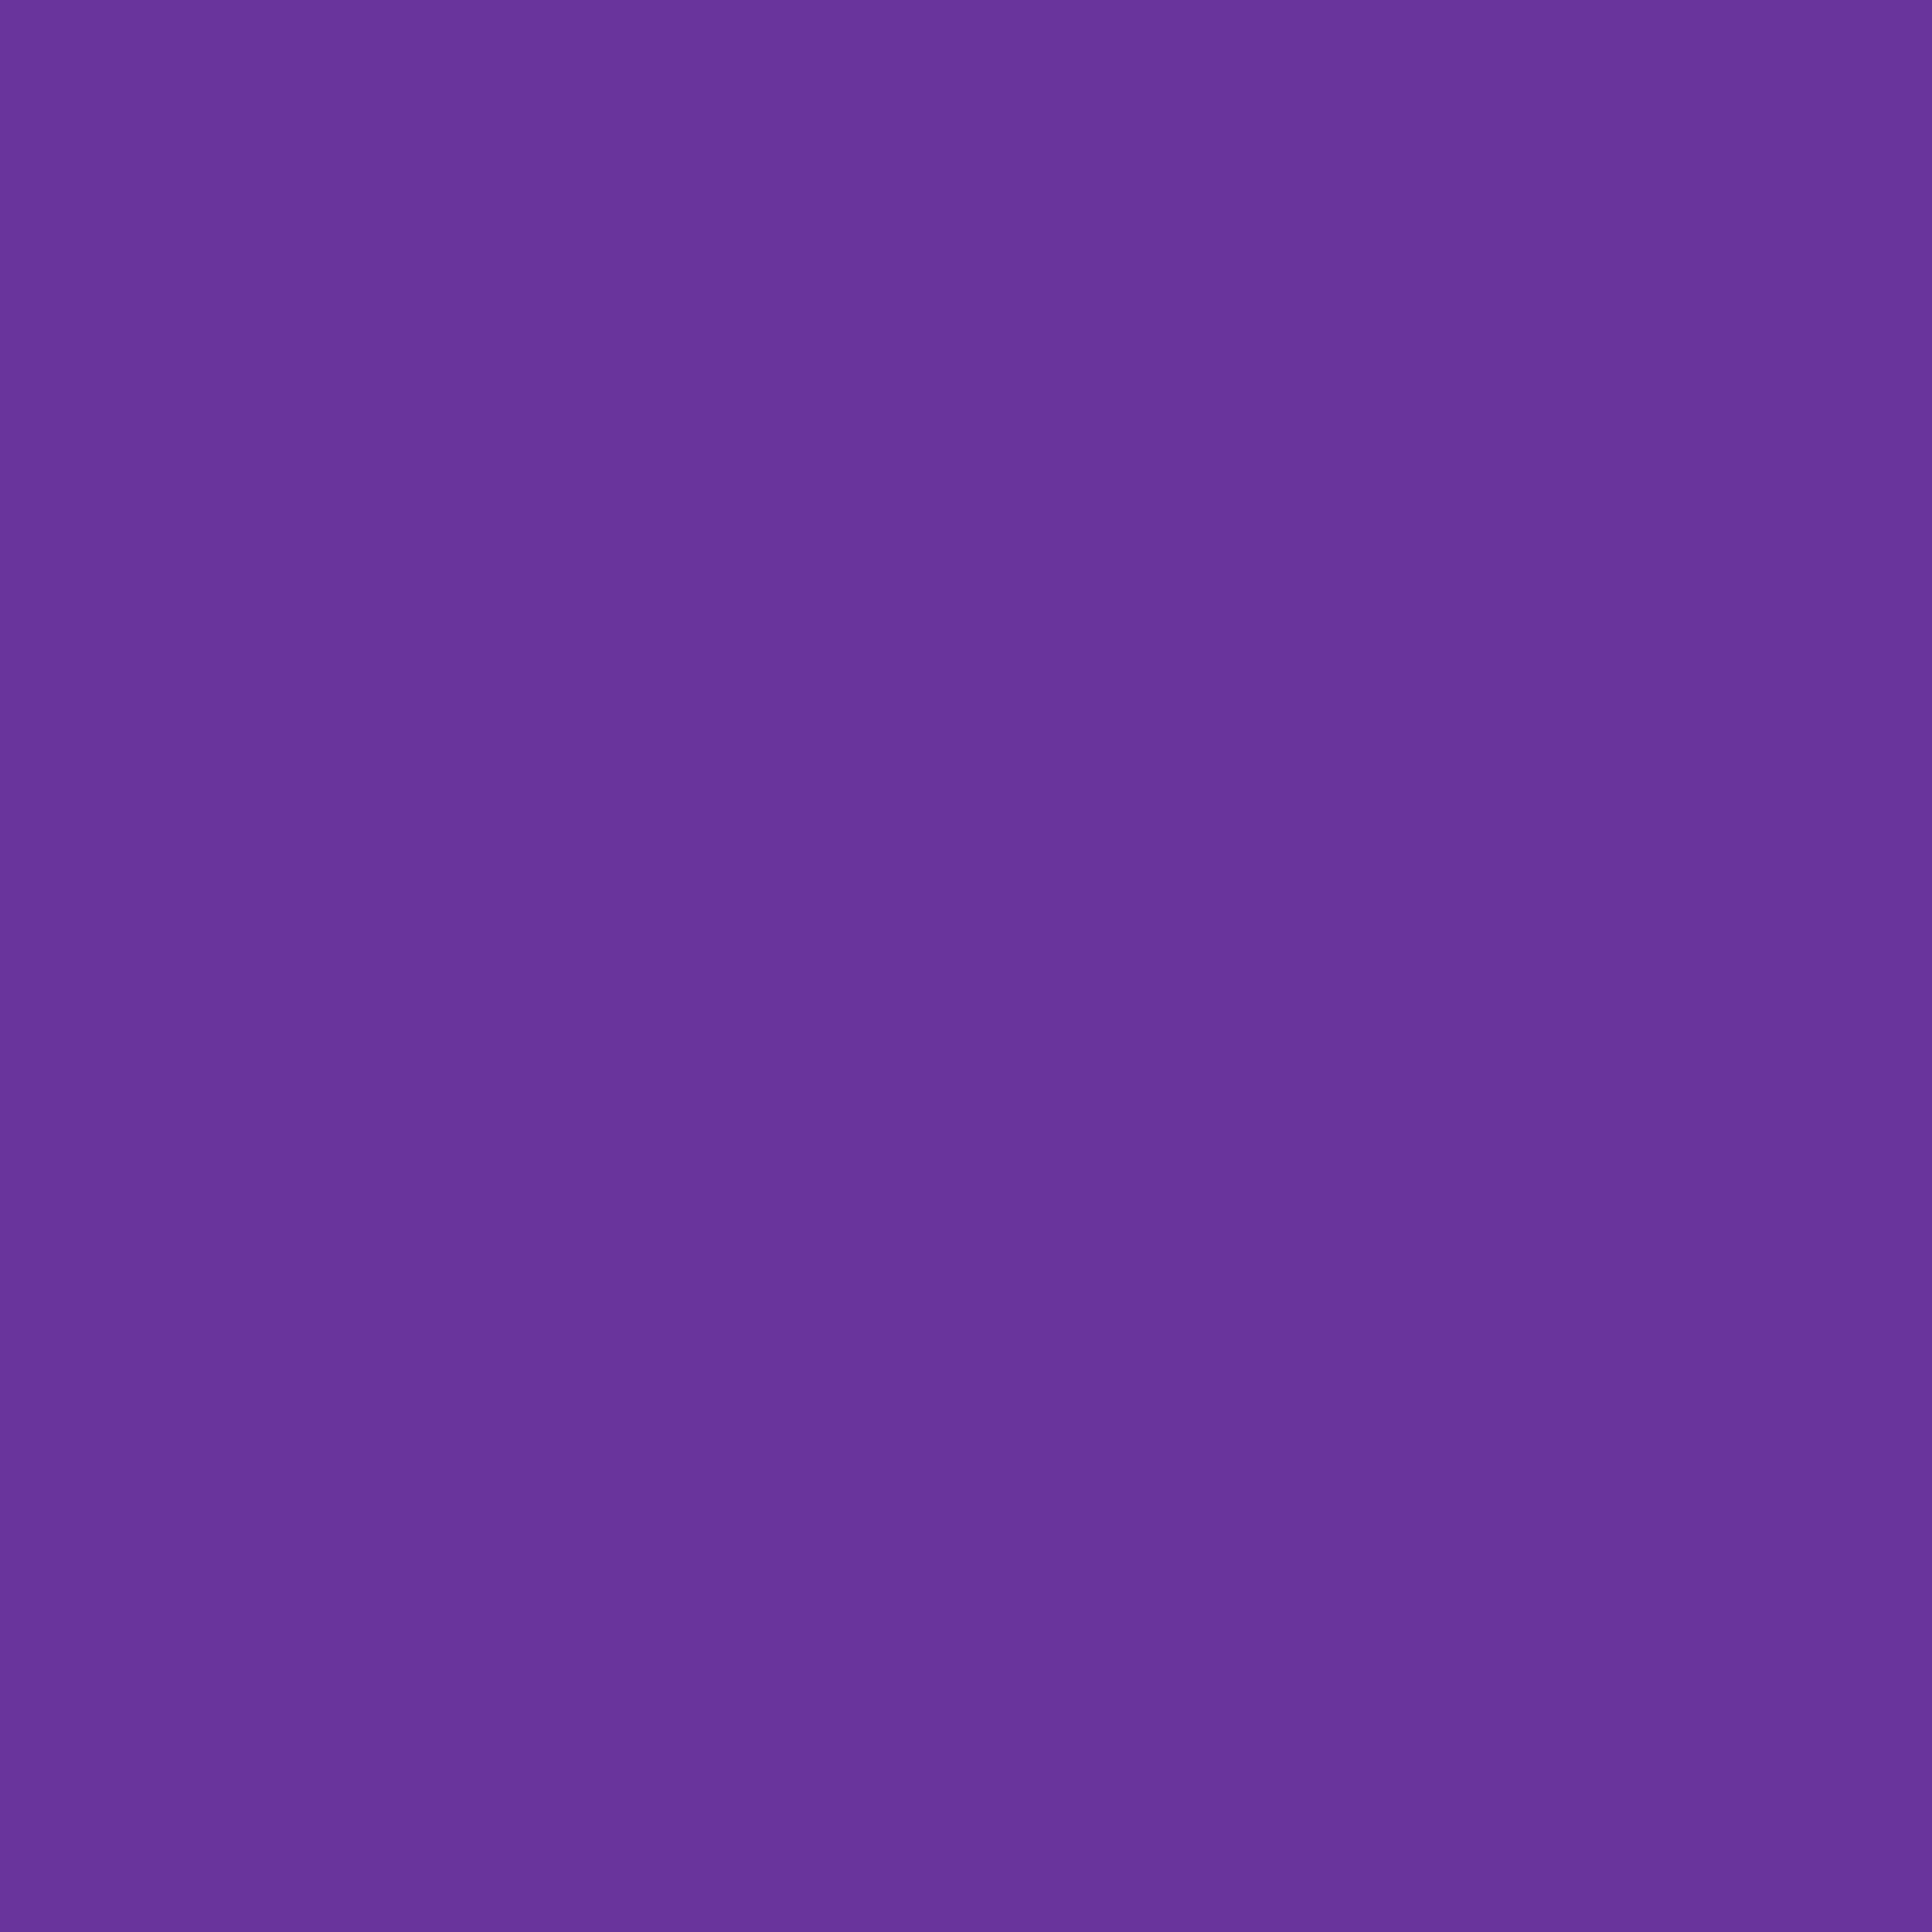 2732x2732 Purple Heart Solid Color Background